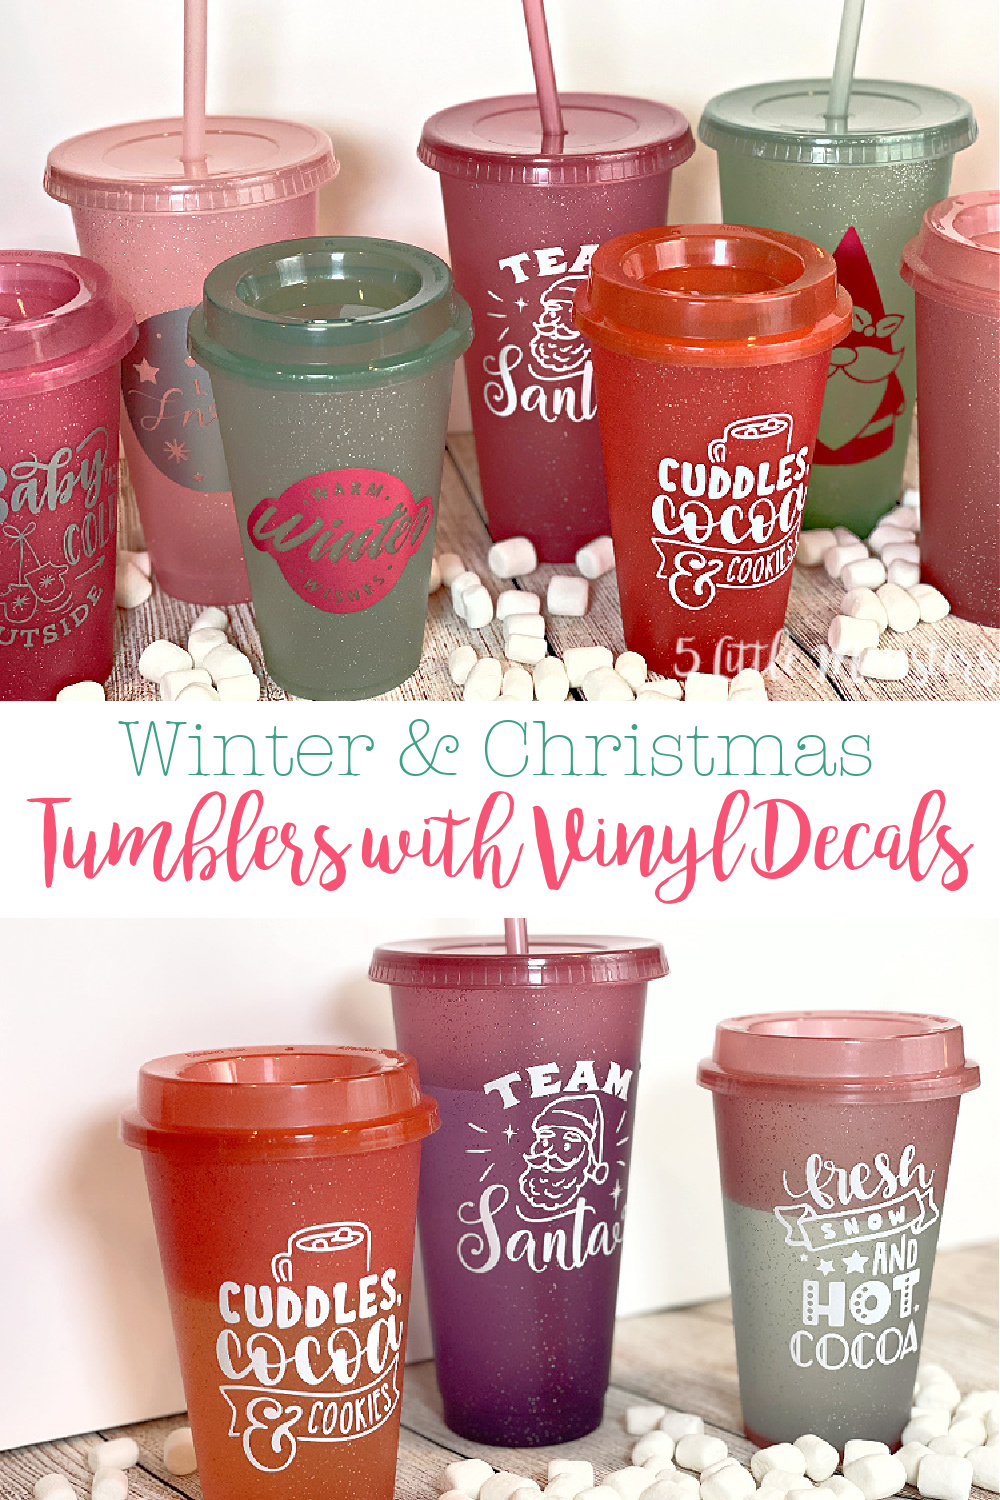 5 Little Monsters: Christmas and Winter Tumblers with Vinyl Decals